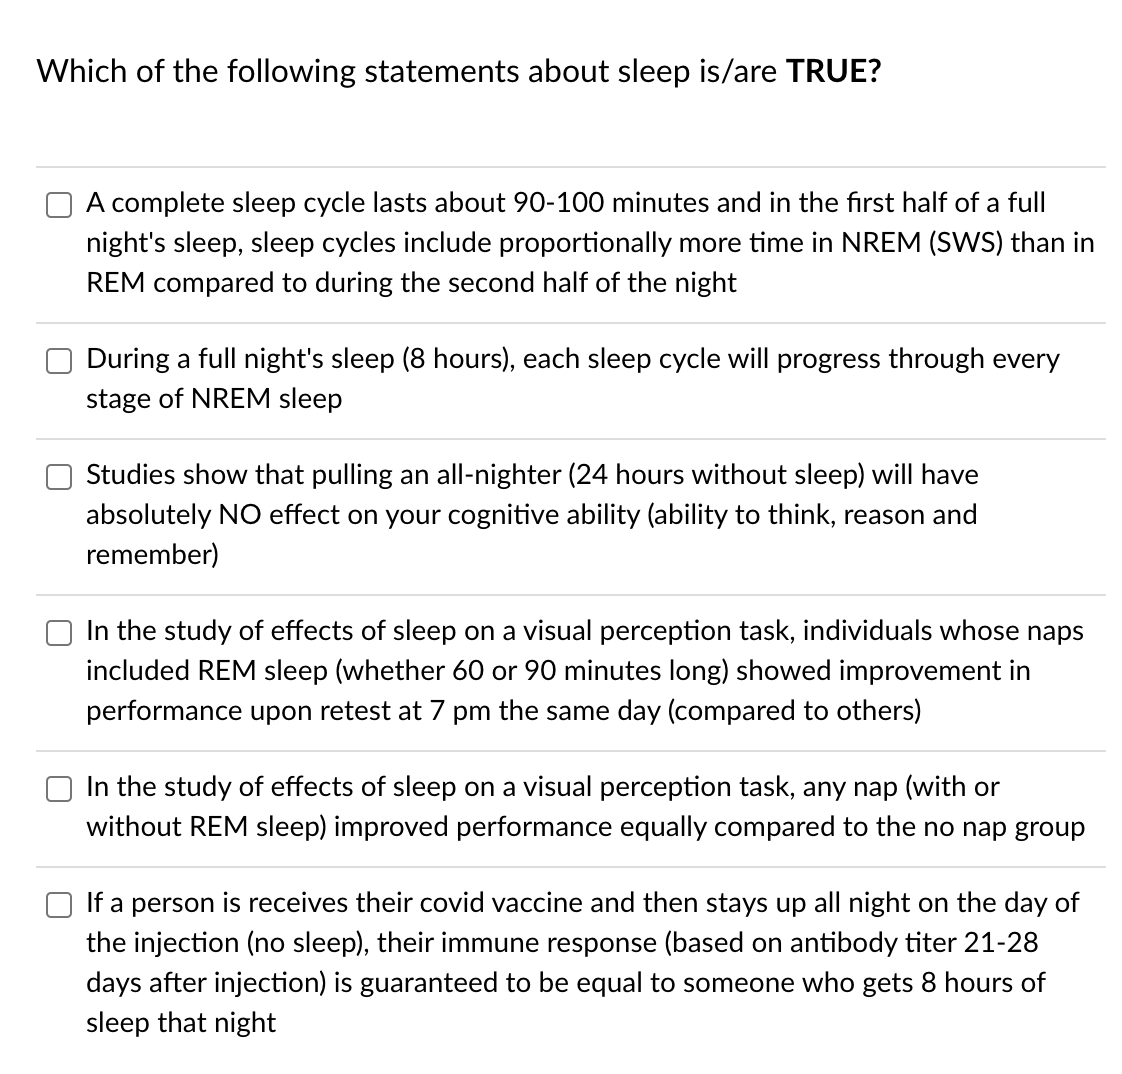 Which of the following statements about sleep is/are TRUE?
A complete sleep cycle lasts about 90-100 minutes and in the first half of a full
night's sleep, sleep cycles include proportionally more time in NREM (SWS) than in
REM compared to during the second half of the night
During a full night's sleep (8 hours), each sleep cycle will progress through every
stage of NREM sleep
Studies show that pulling an all-nighter (24 hours without sleep) will have
absolutely NO effect on your cognitive ability (ability to think, reason and
remember)
In the study of effects of sleep on a visual perception task, individuals whose naps
included REM sleep (whether 60 or 90 minutes long) showed improvement in
performance upon retest at 7 pm the same day (compared to others)
In the study of effects of sleep on a visual perception task, any nap (with or
without REM sleep) improved performance equally compared to the no nap group
If a person is receives their covid vaccine and then stays up all night on the day of
the injection (no sleep), their immune response (based on antibody titer 21-28
days after injection) is guaranteed to be equal to someone who gets 8 hours of
sleep that night
